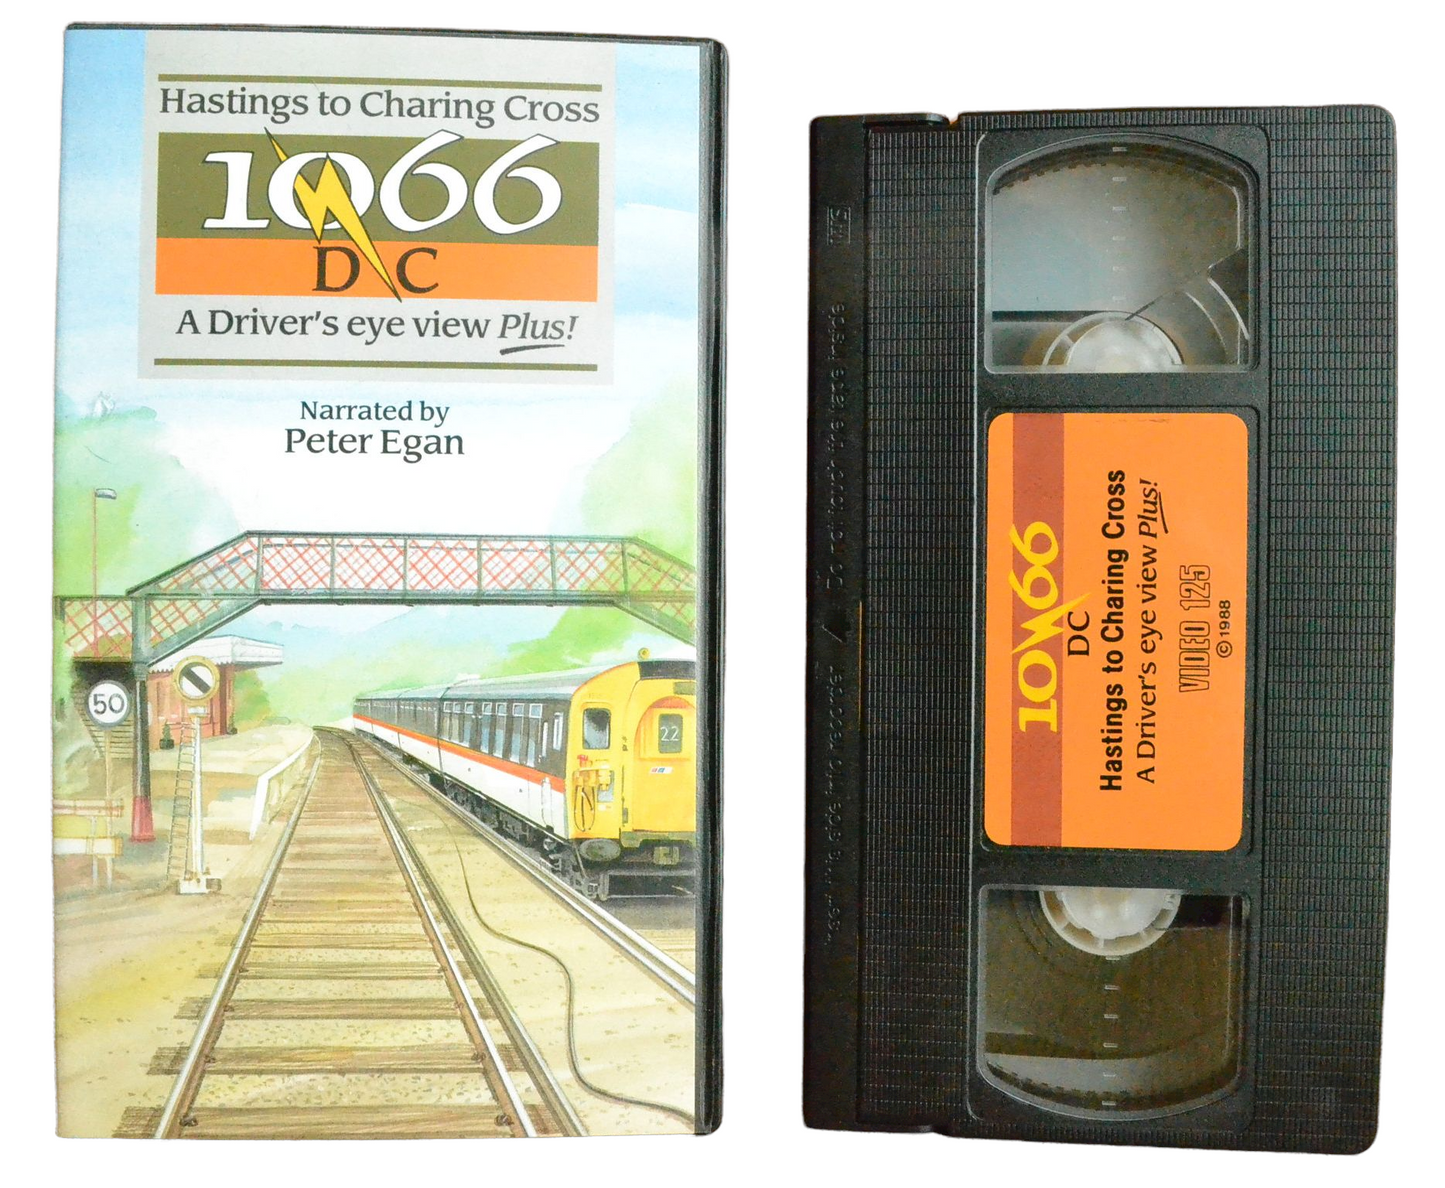 Hastings to Charing Cross: A Driver's eye view Plus! - Video 125 - Pal VHS-